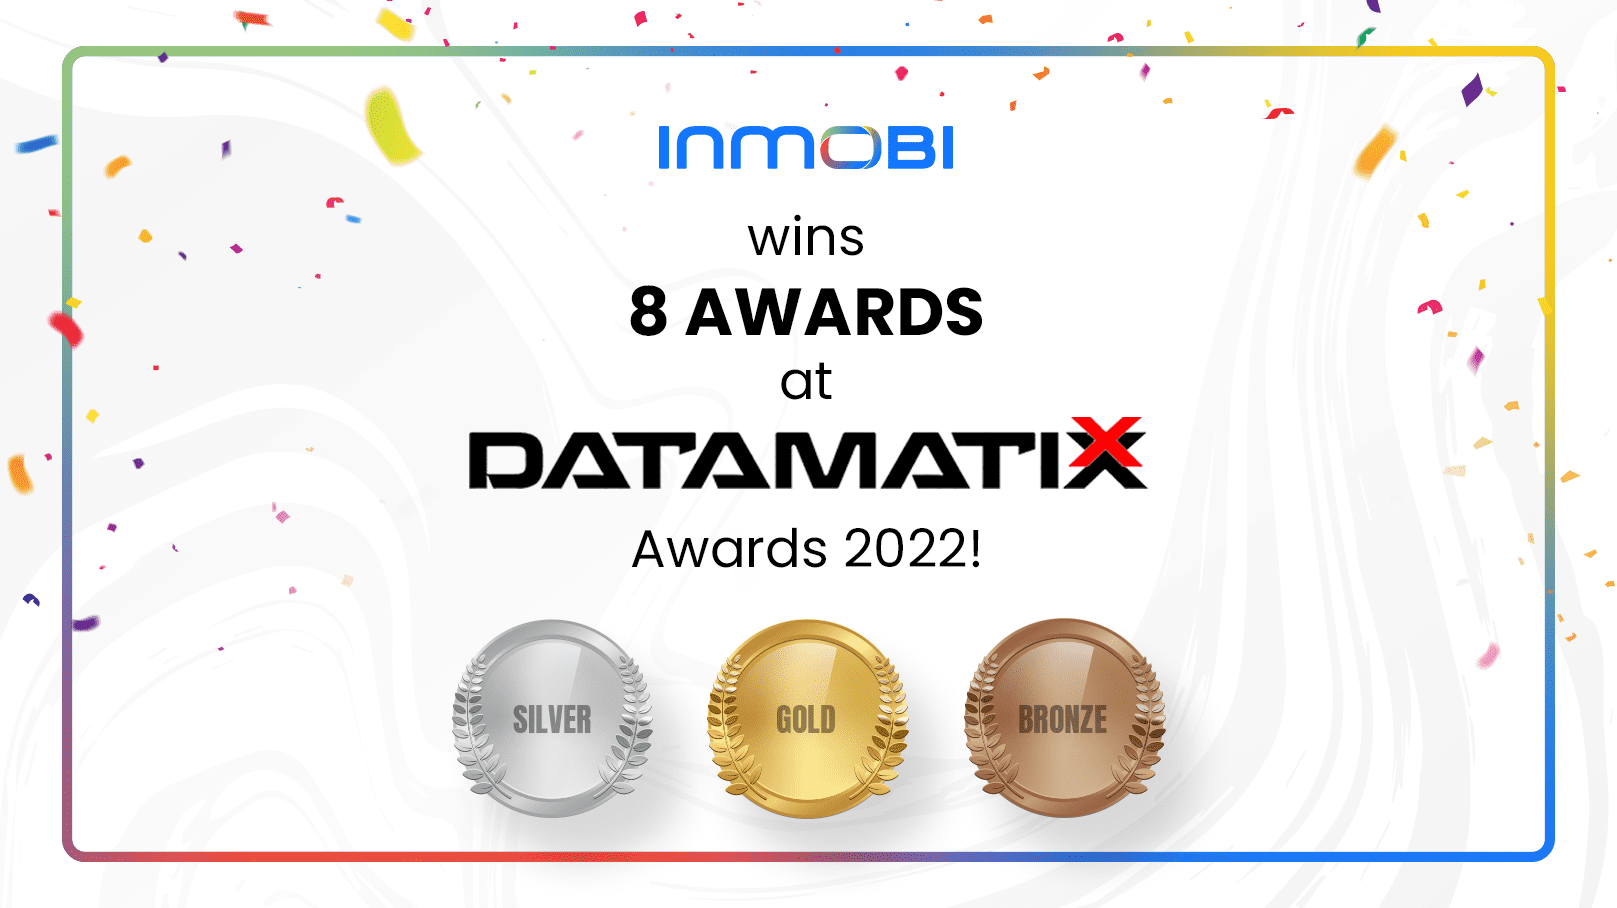 InMobi makes a mark at DATAMATIXX Awards 2022: Secures 8 wins for innovative, mobile-first advertising